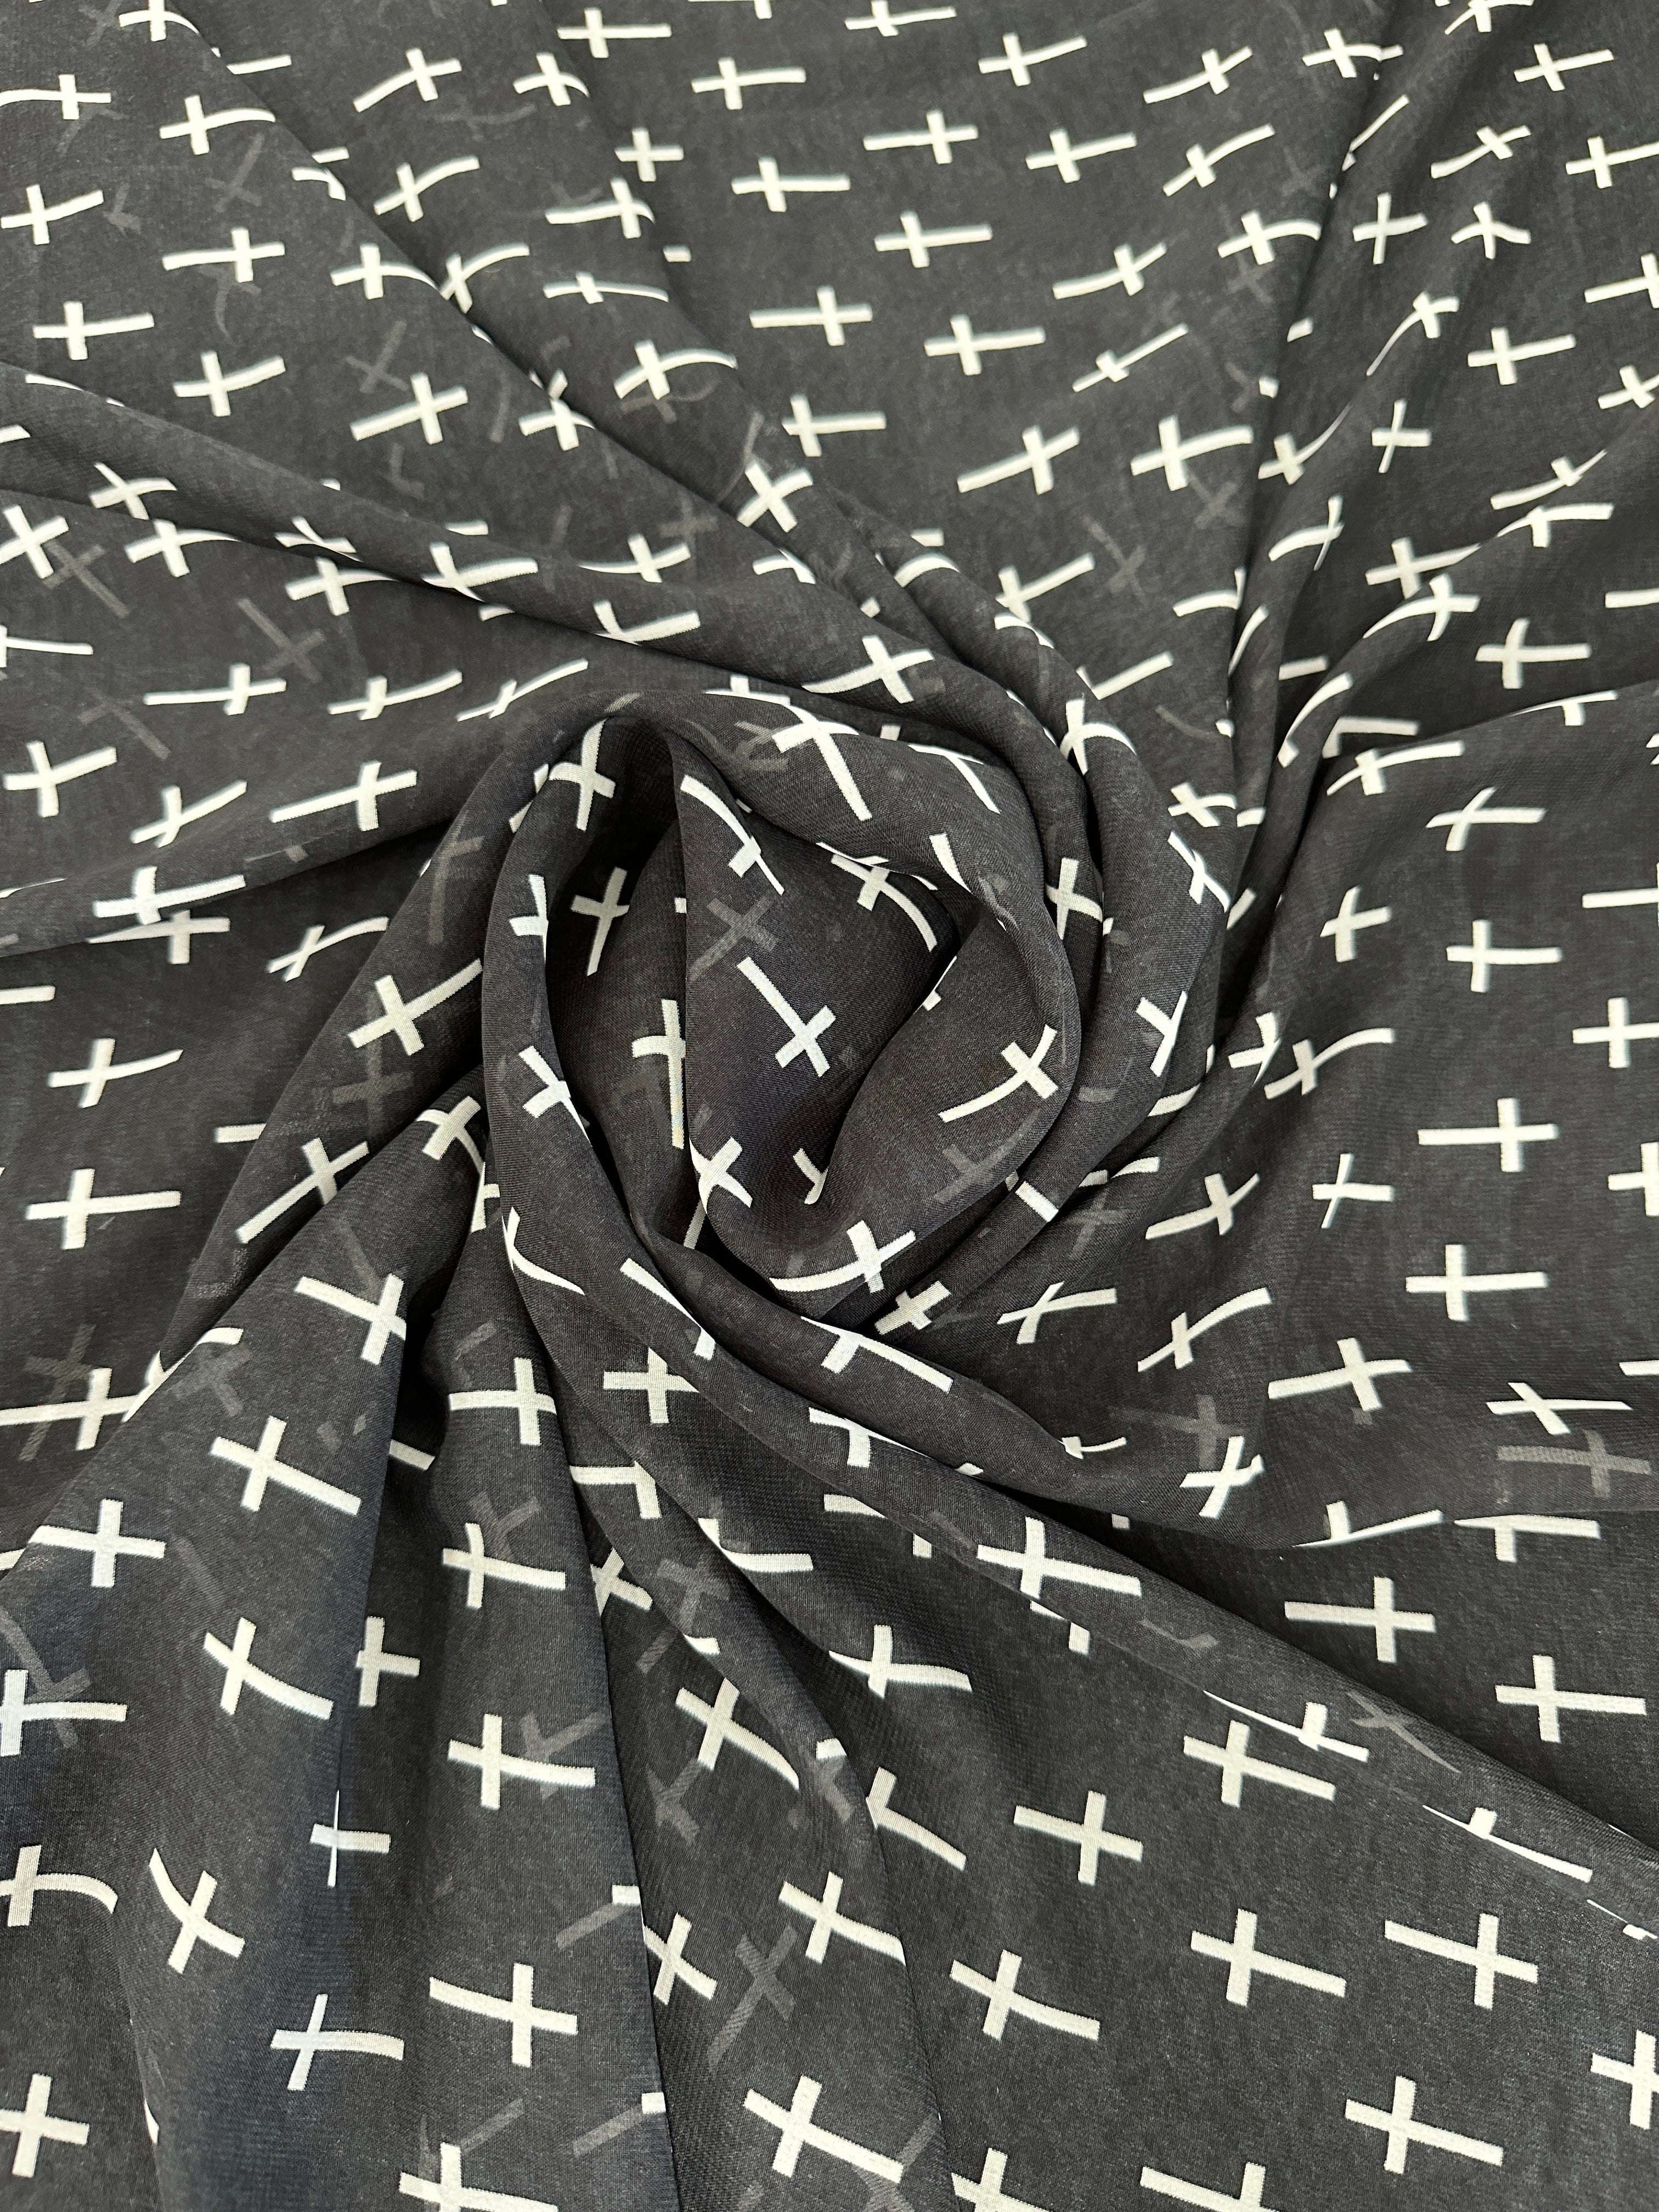 Black and White Cross Print Chiffon, online textile store, sewing, fabric store, sewing store, cheap fabric store, kiki textiles